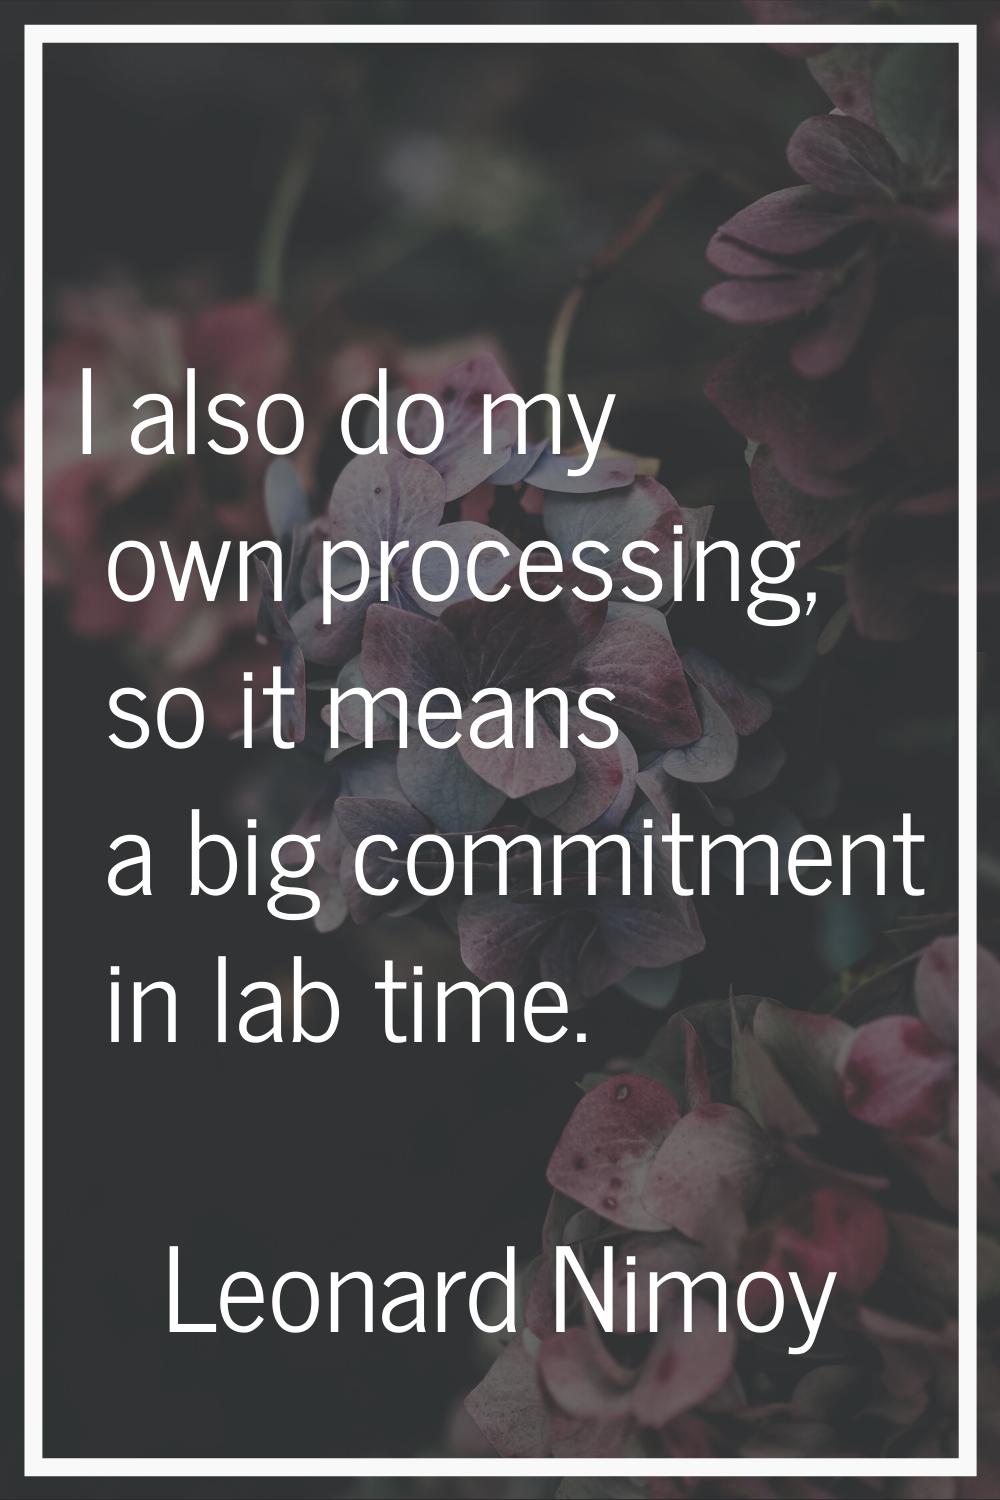 I also do my own processing, so it means a big commitment in lab time.